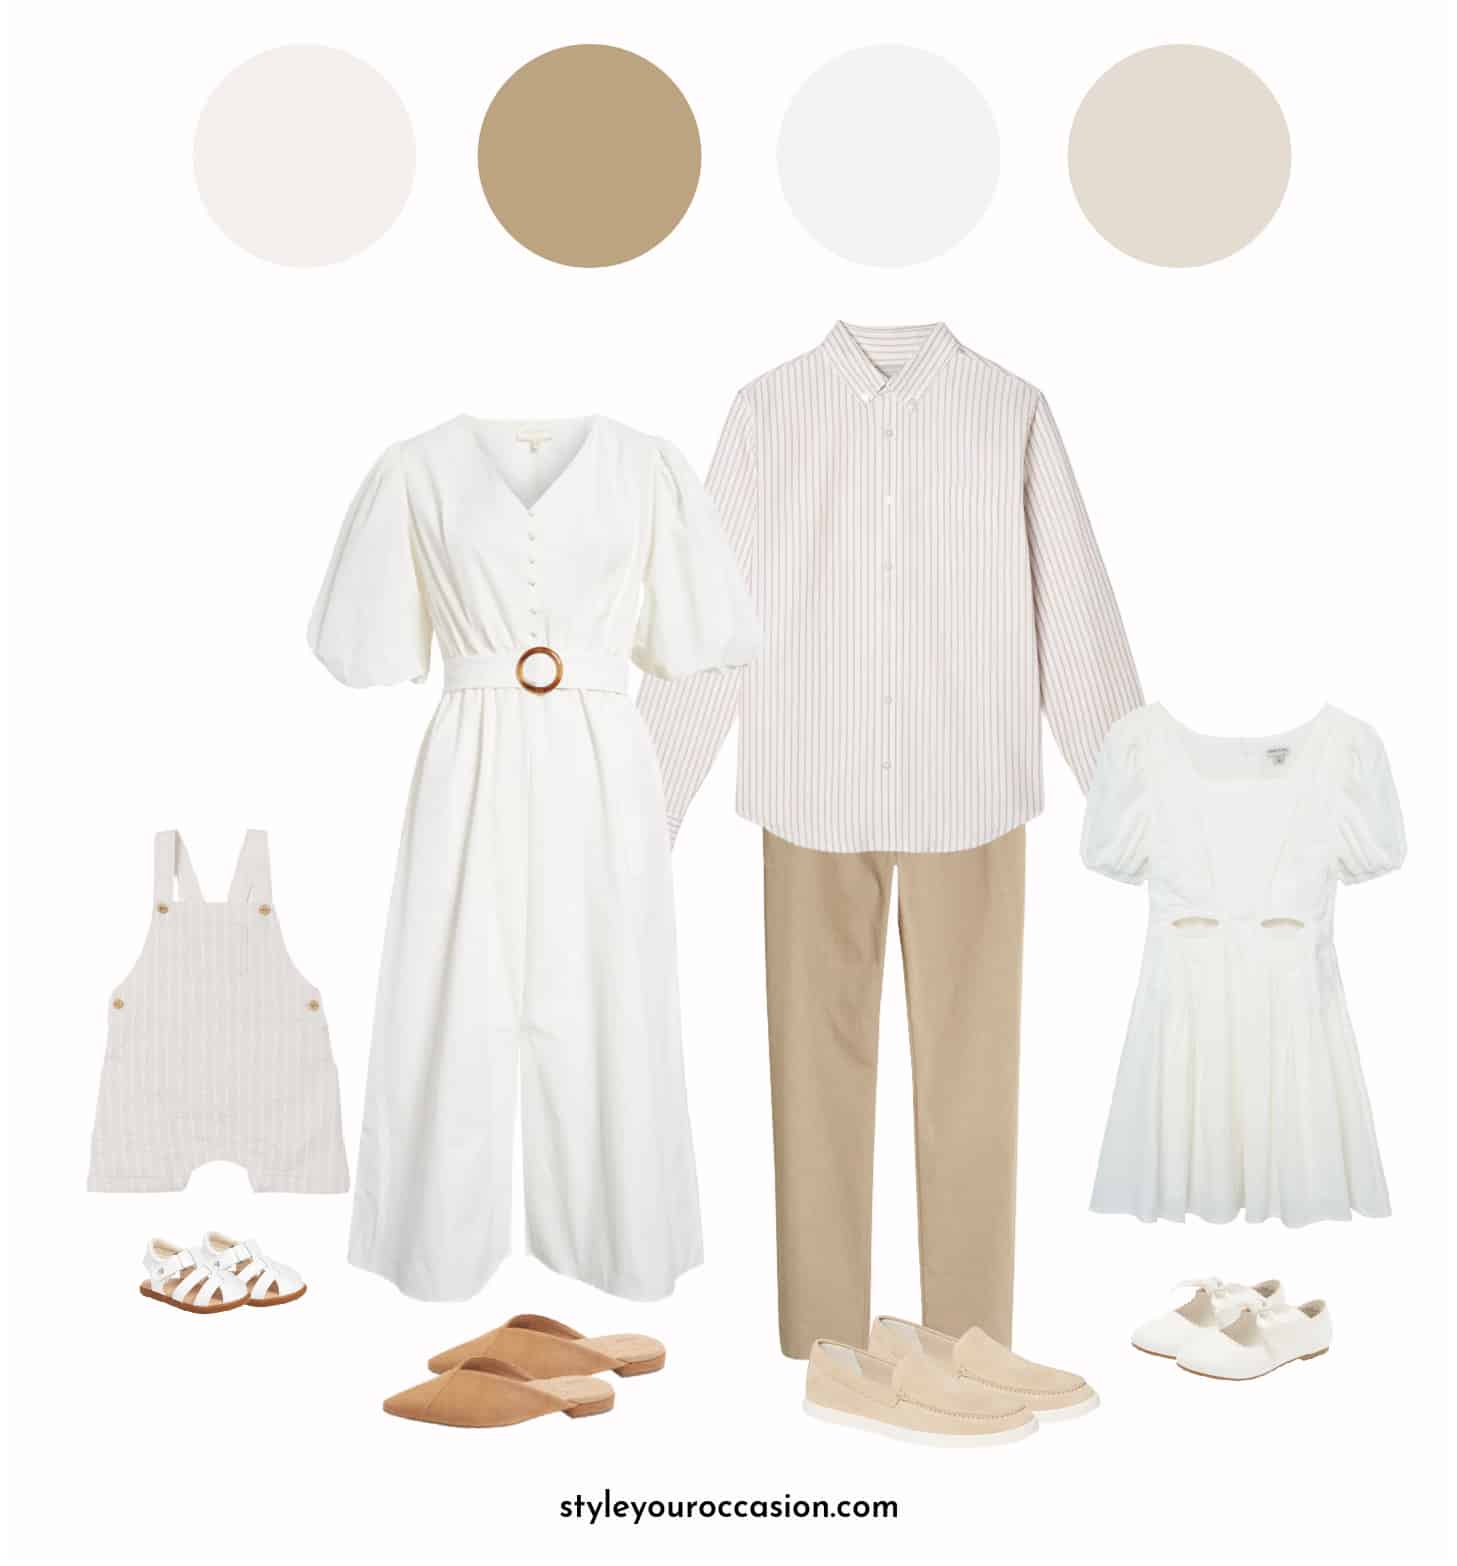 mood board of a family photo outfit guide with neutral colors